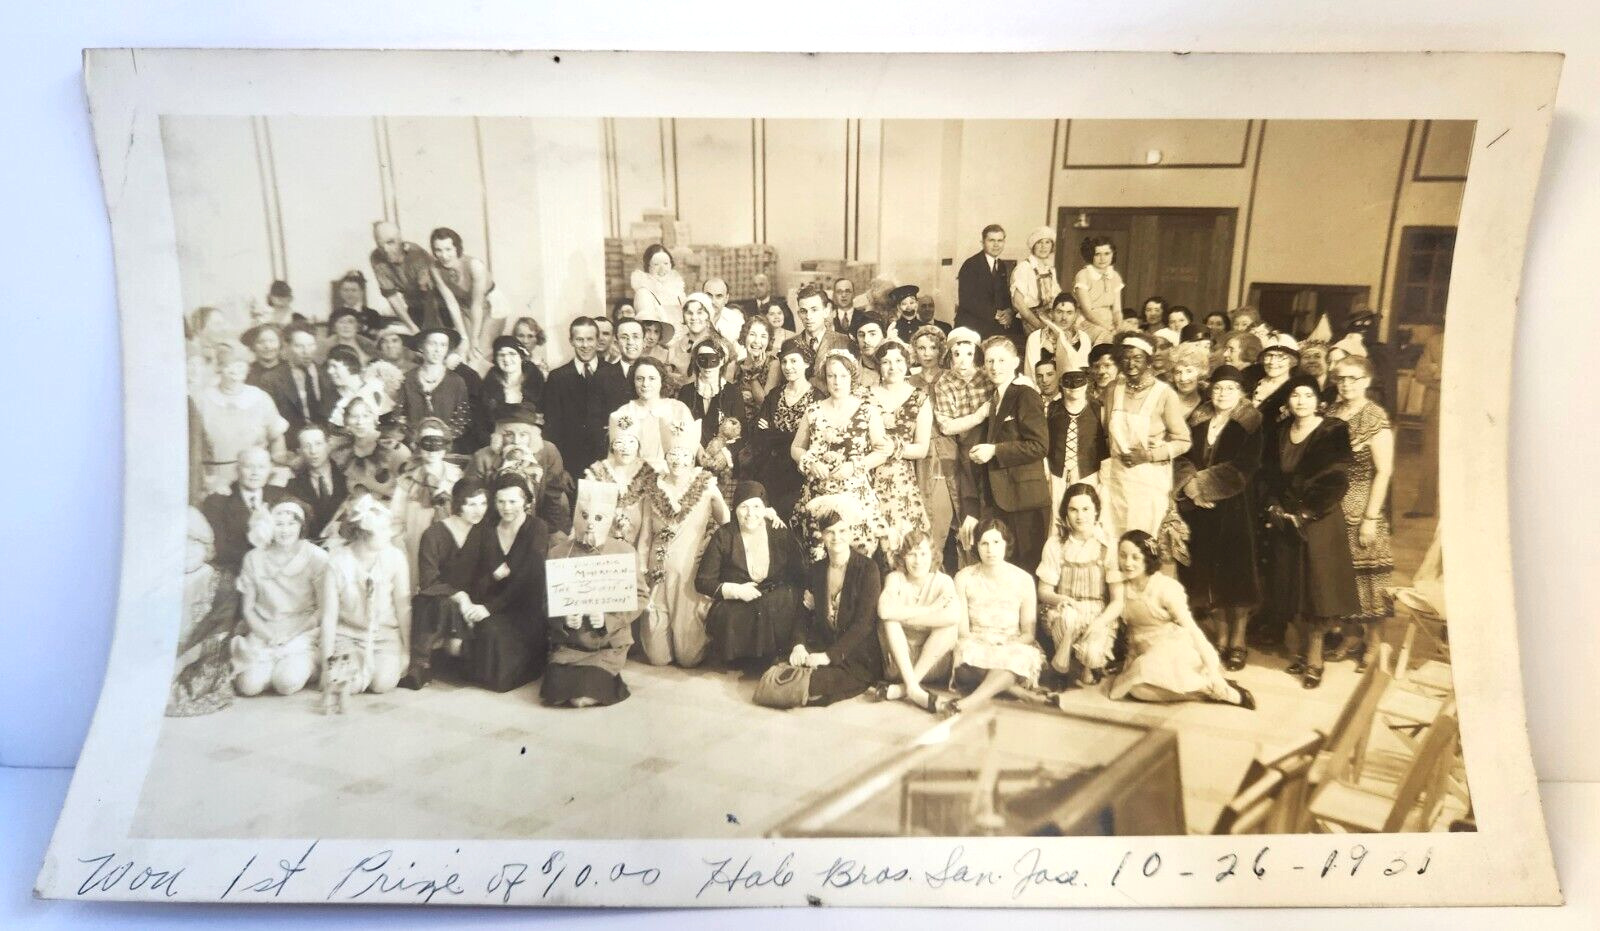 Hale Brothers Department Store San Jose CA 1931 Halloween Party Contest Photo